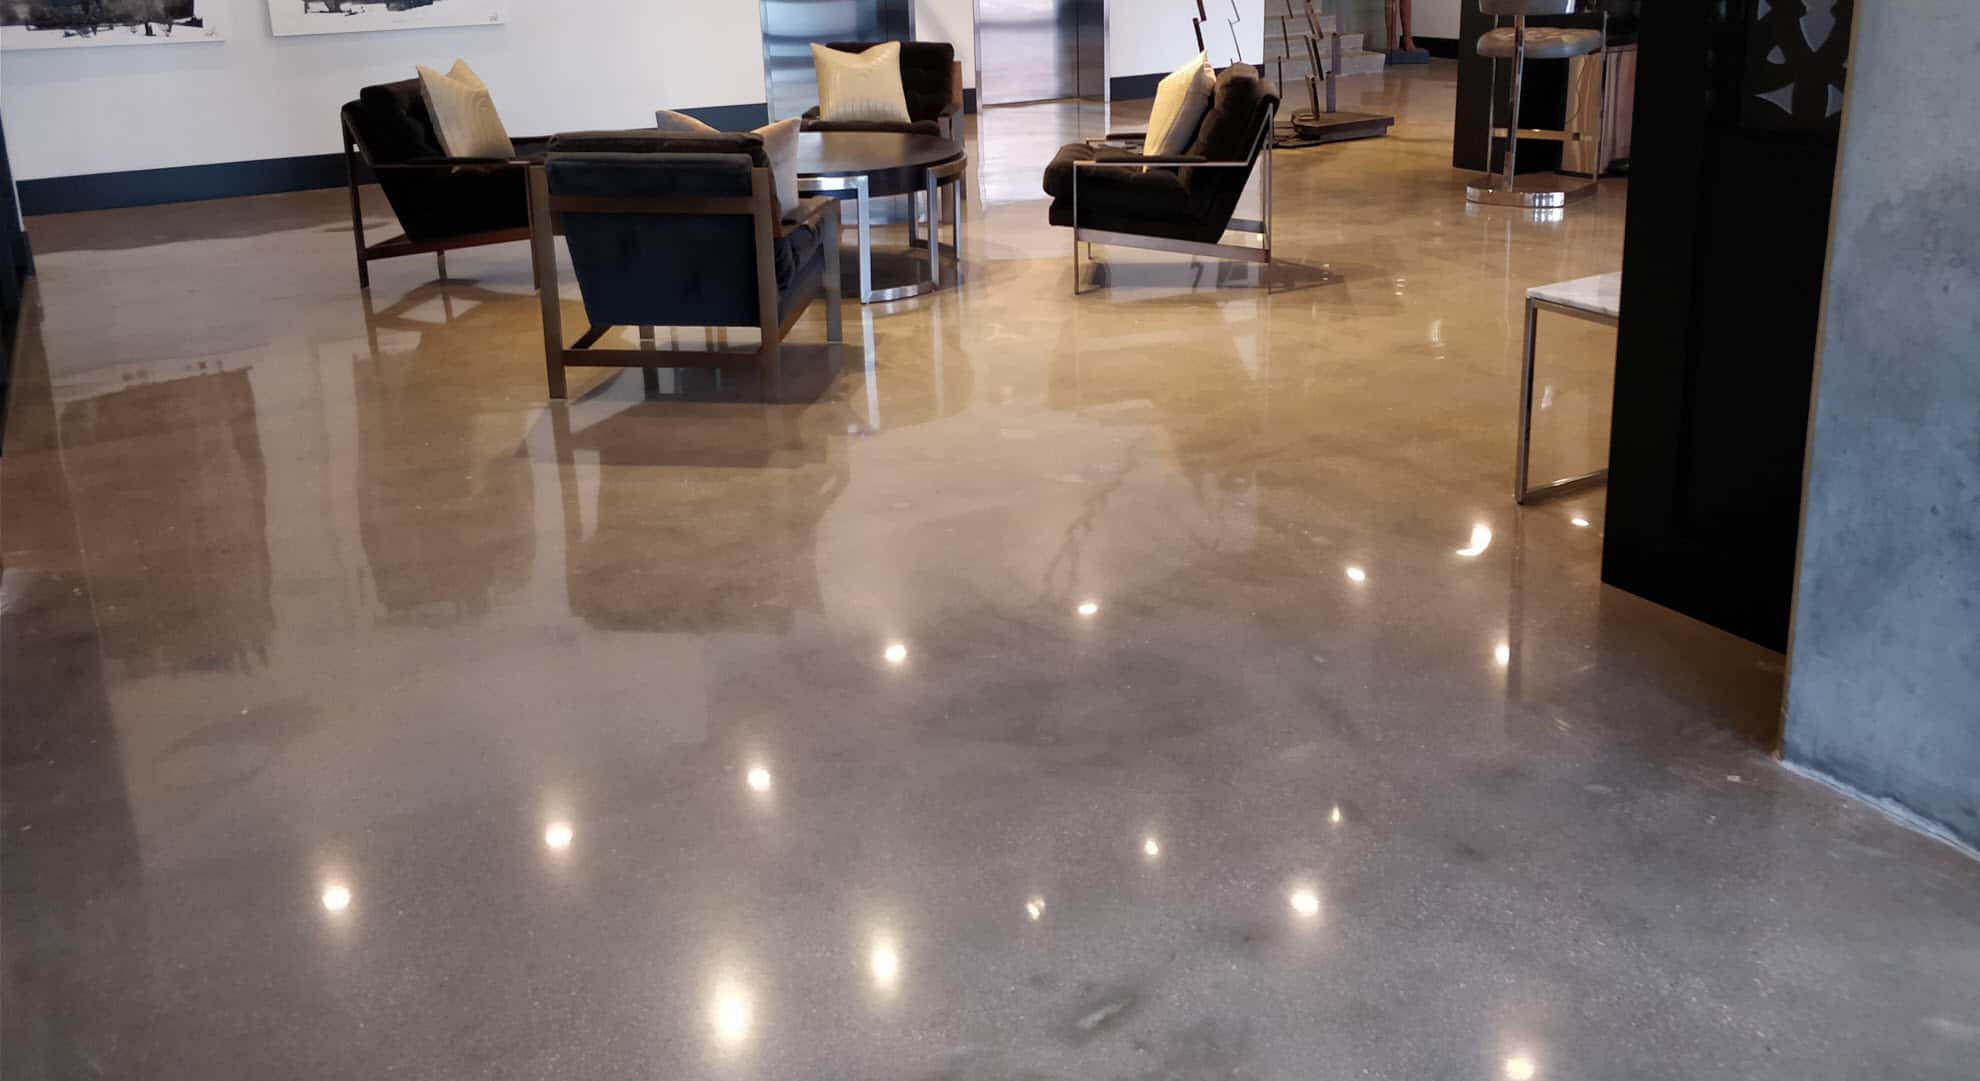 Office building polished concrete seating area